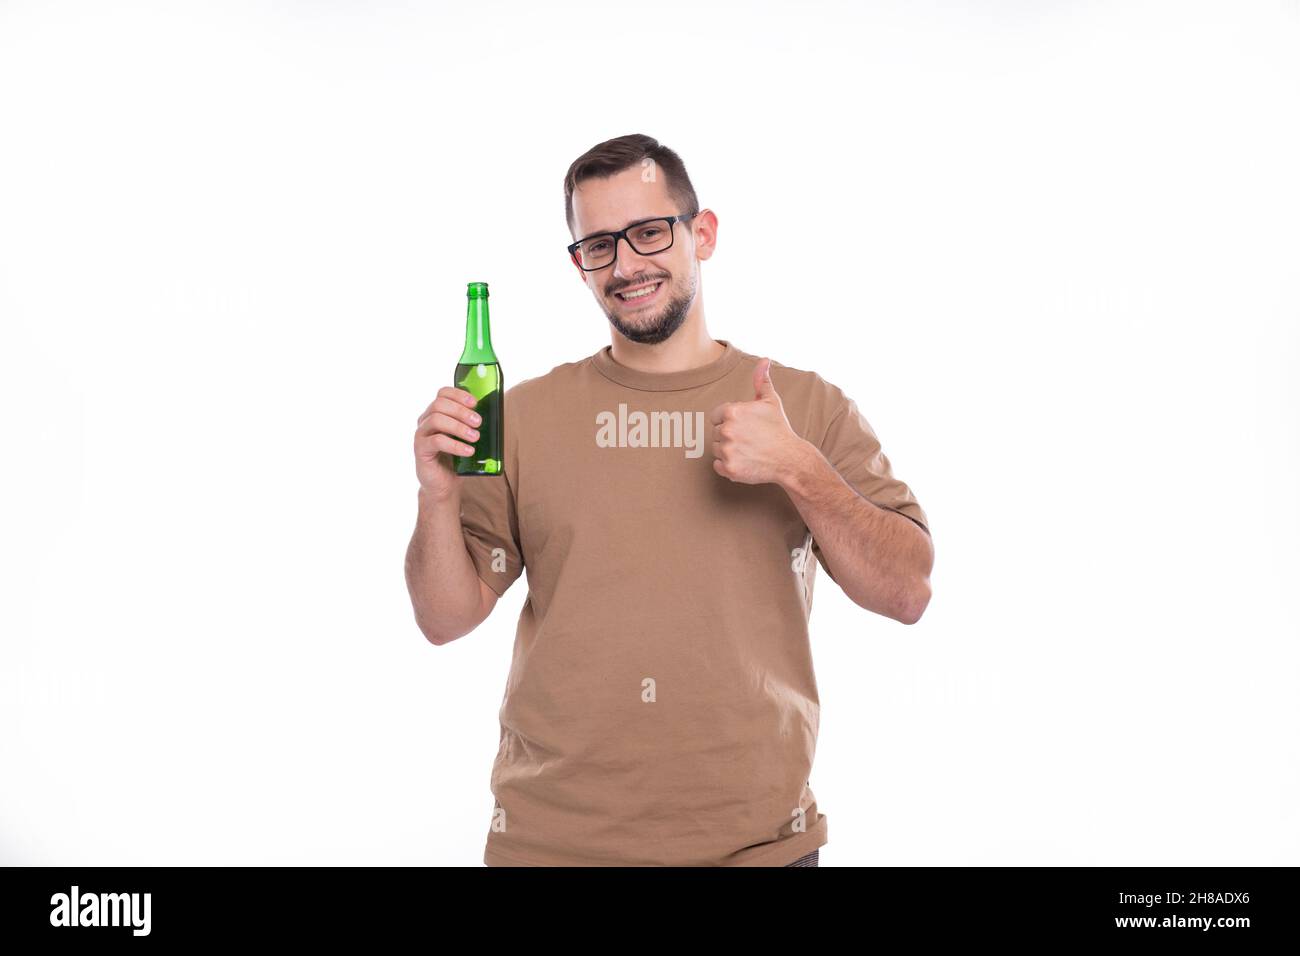 Man Holding Beer Bottle Showing Thumb Up. Man With Beer Bottle in Hands. Alcohol Drink Stock Photo